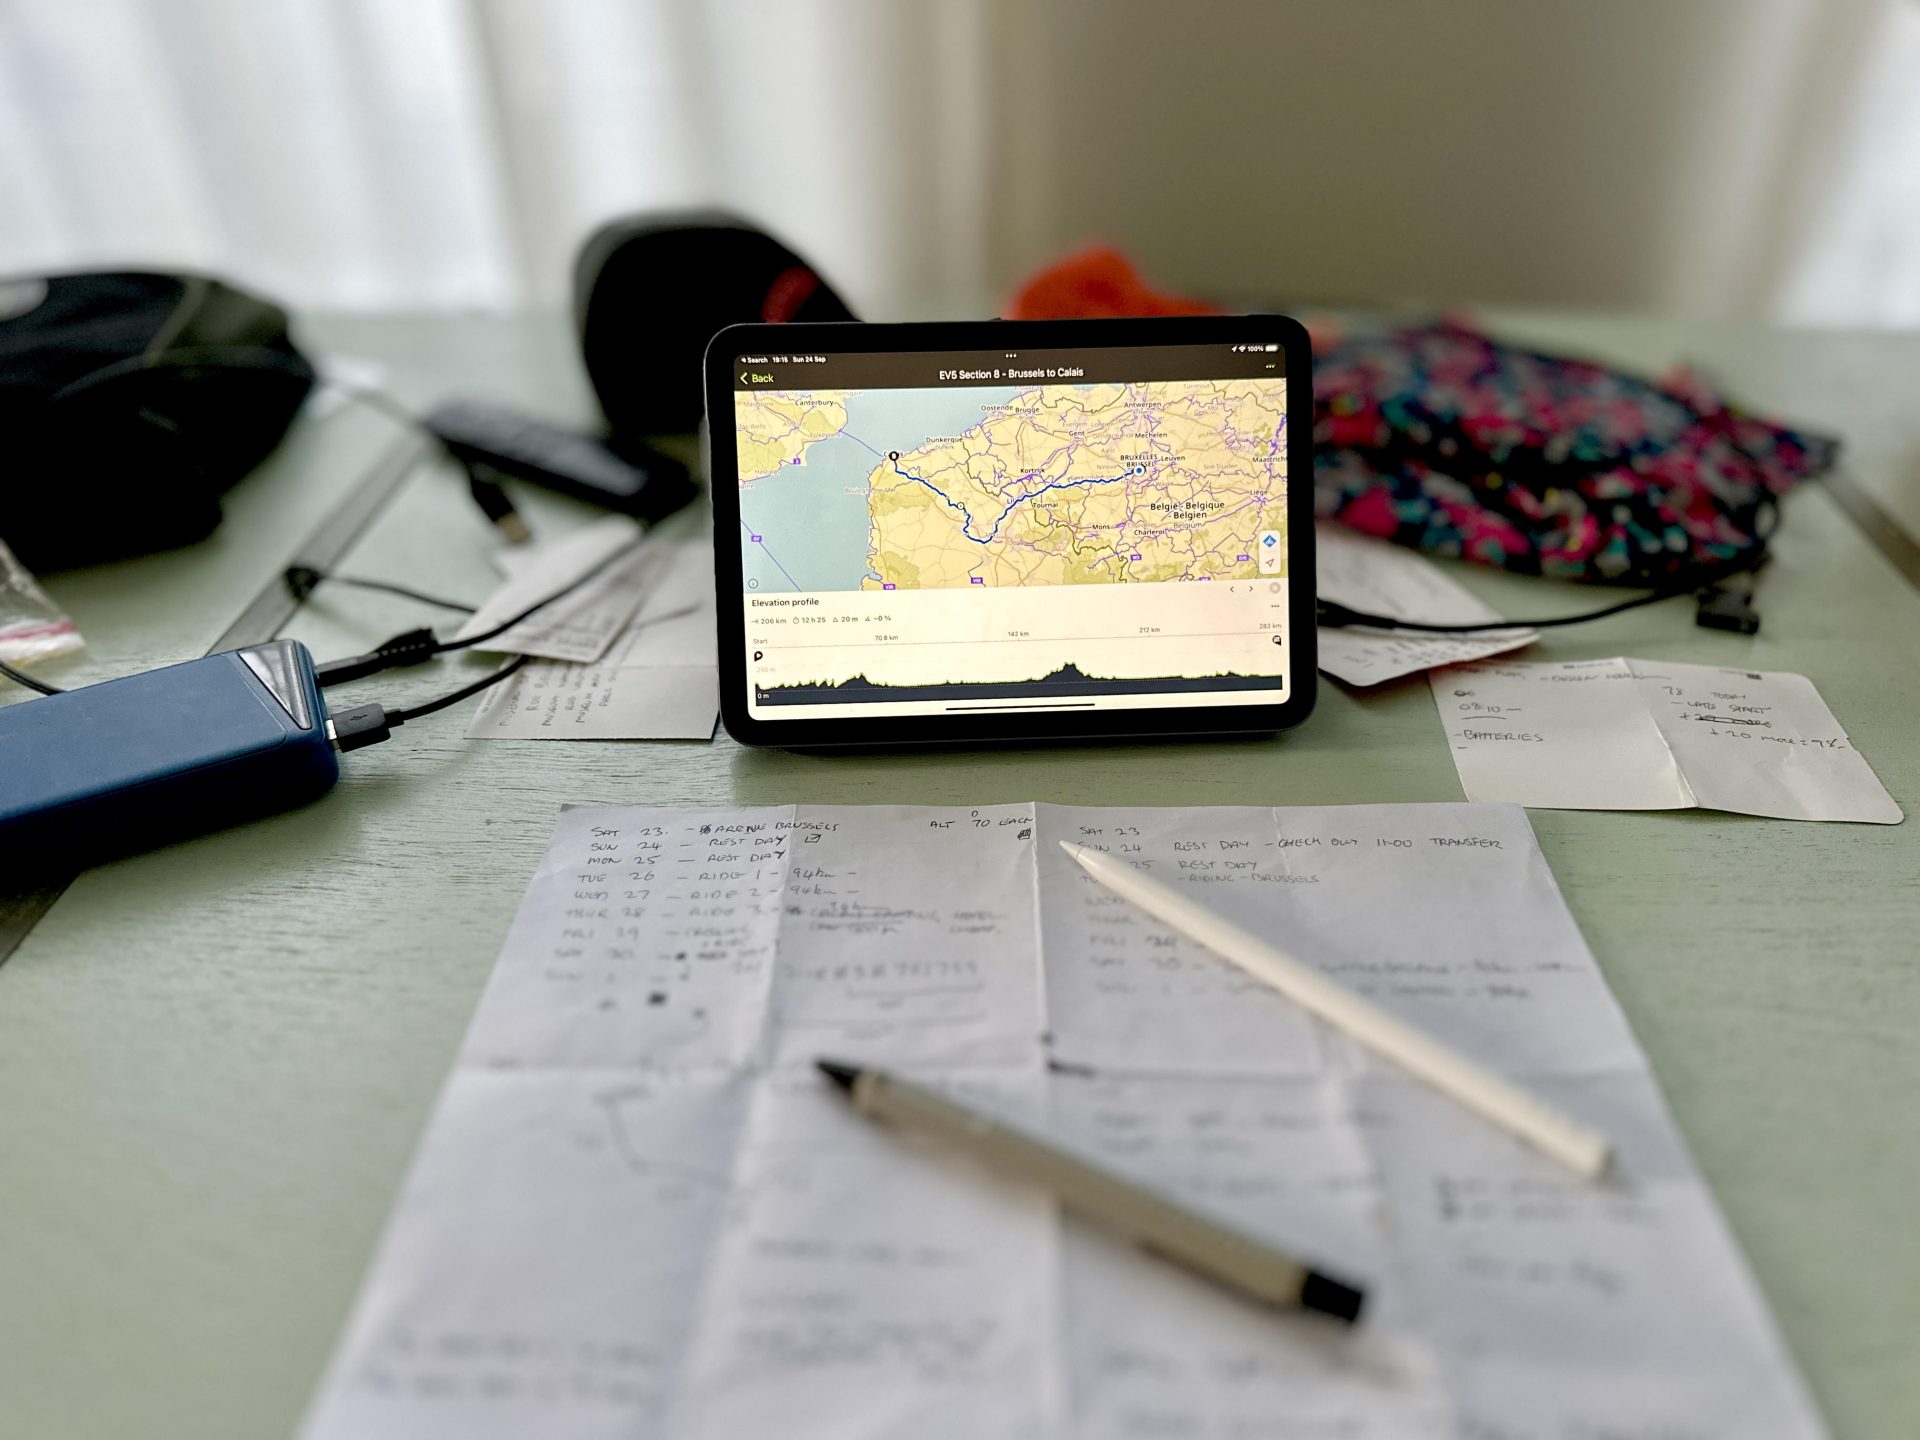 An iPad shows a bike route on screen while pens and paper little a table, with calculations about daily distances.